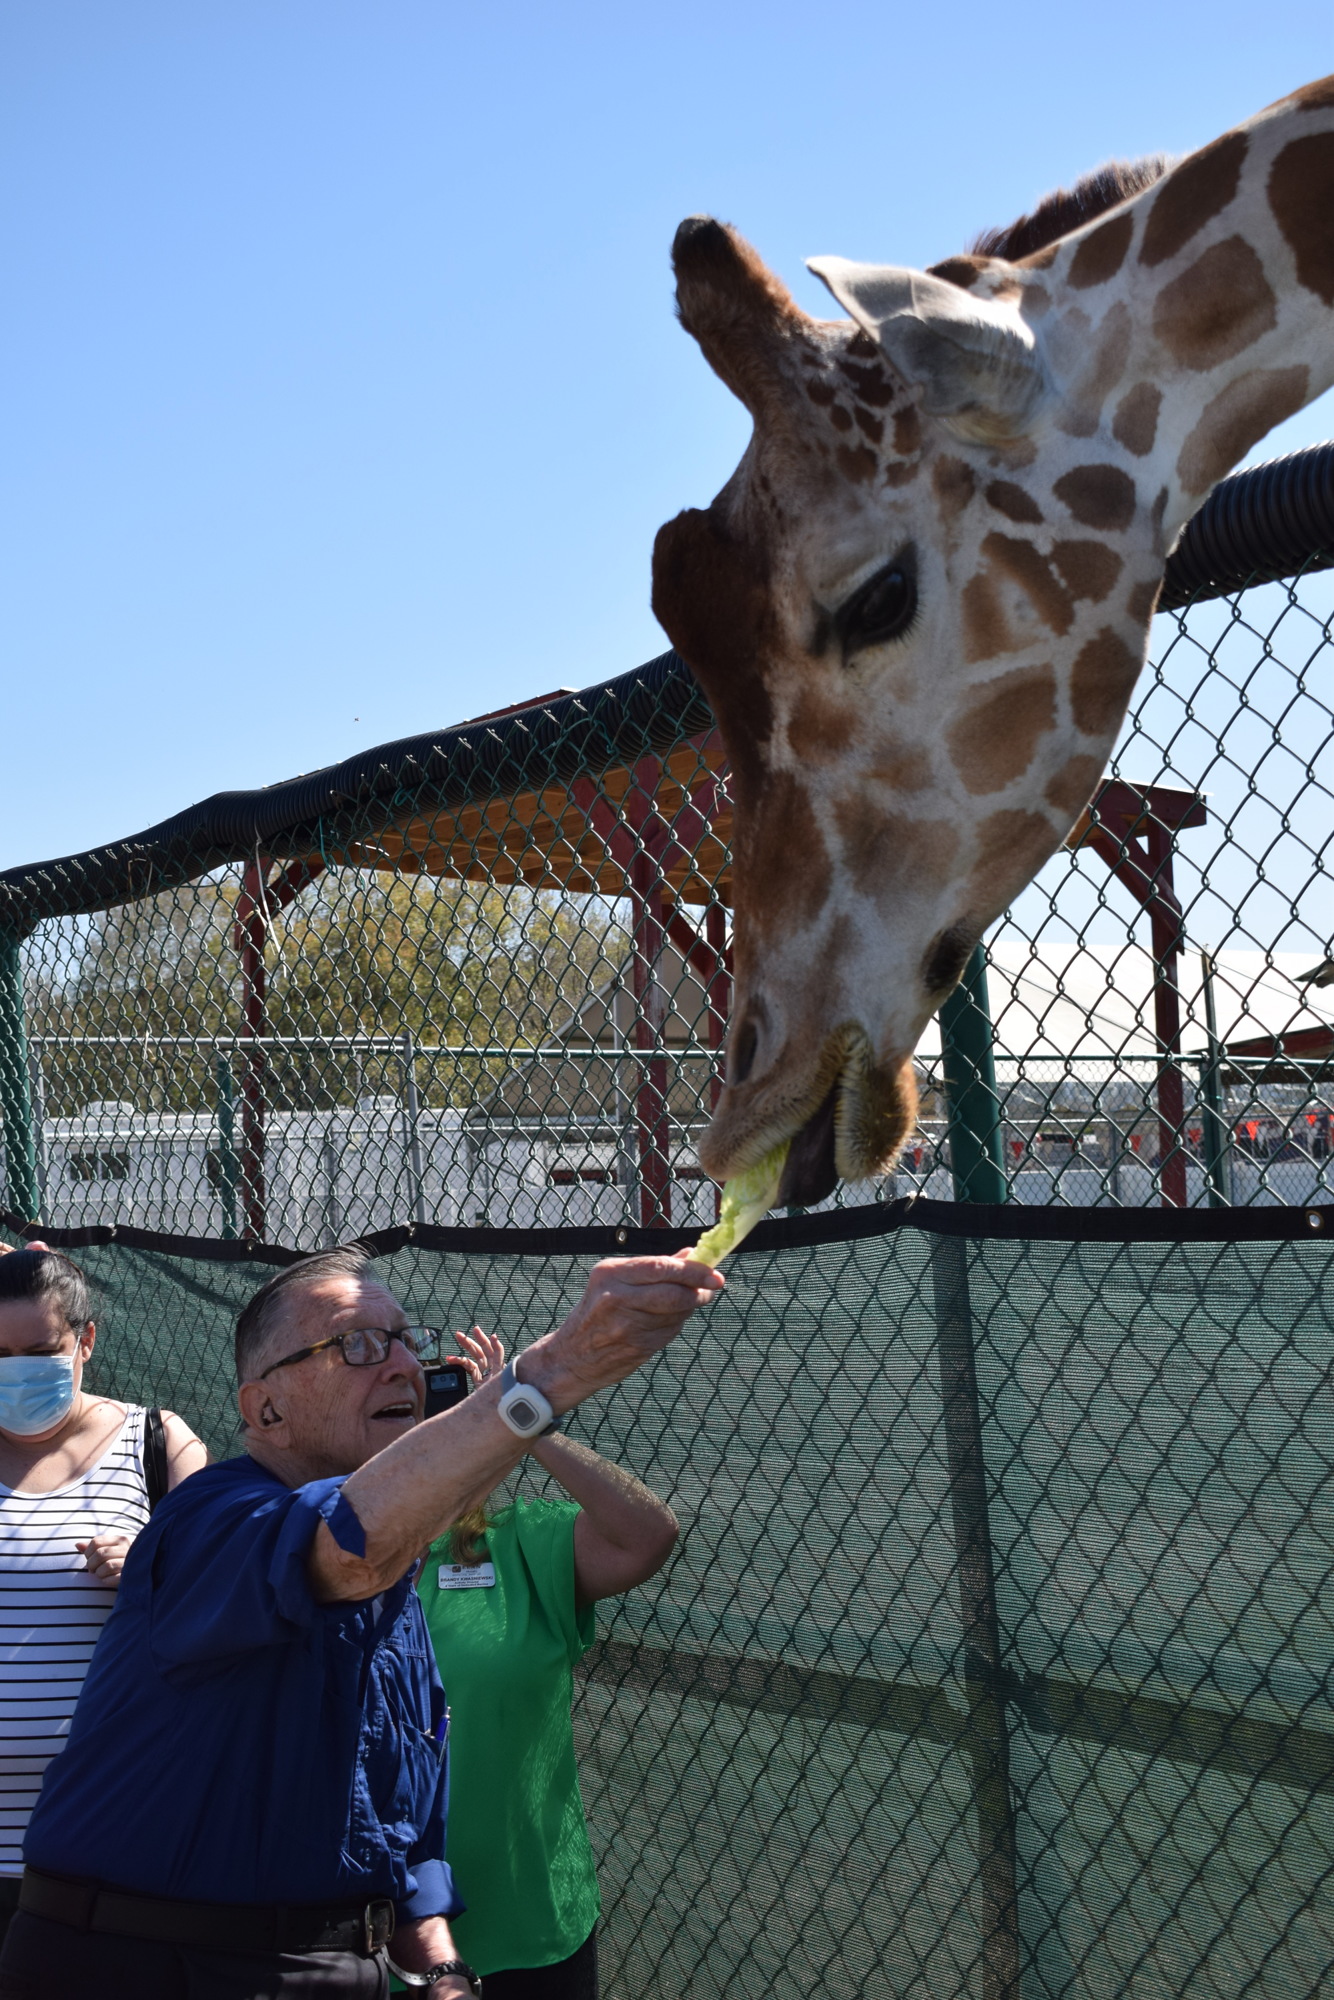 William Hatt finished his visit with the zebras and then made his way over to the giraffe habitat.